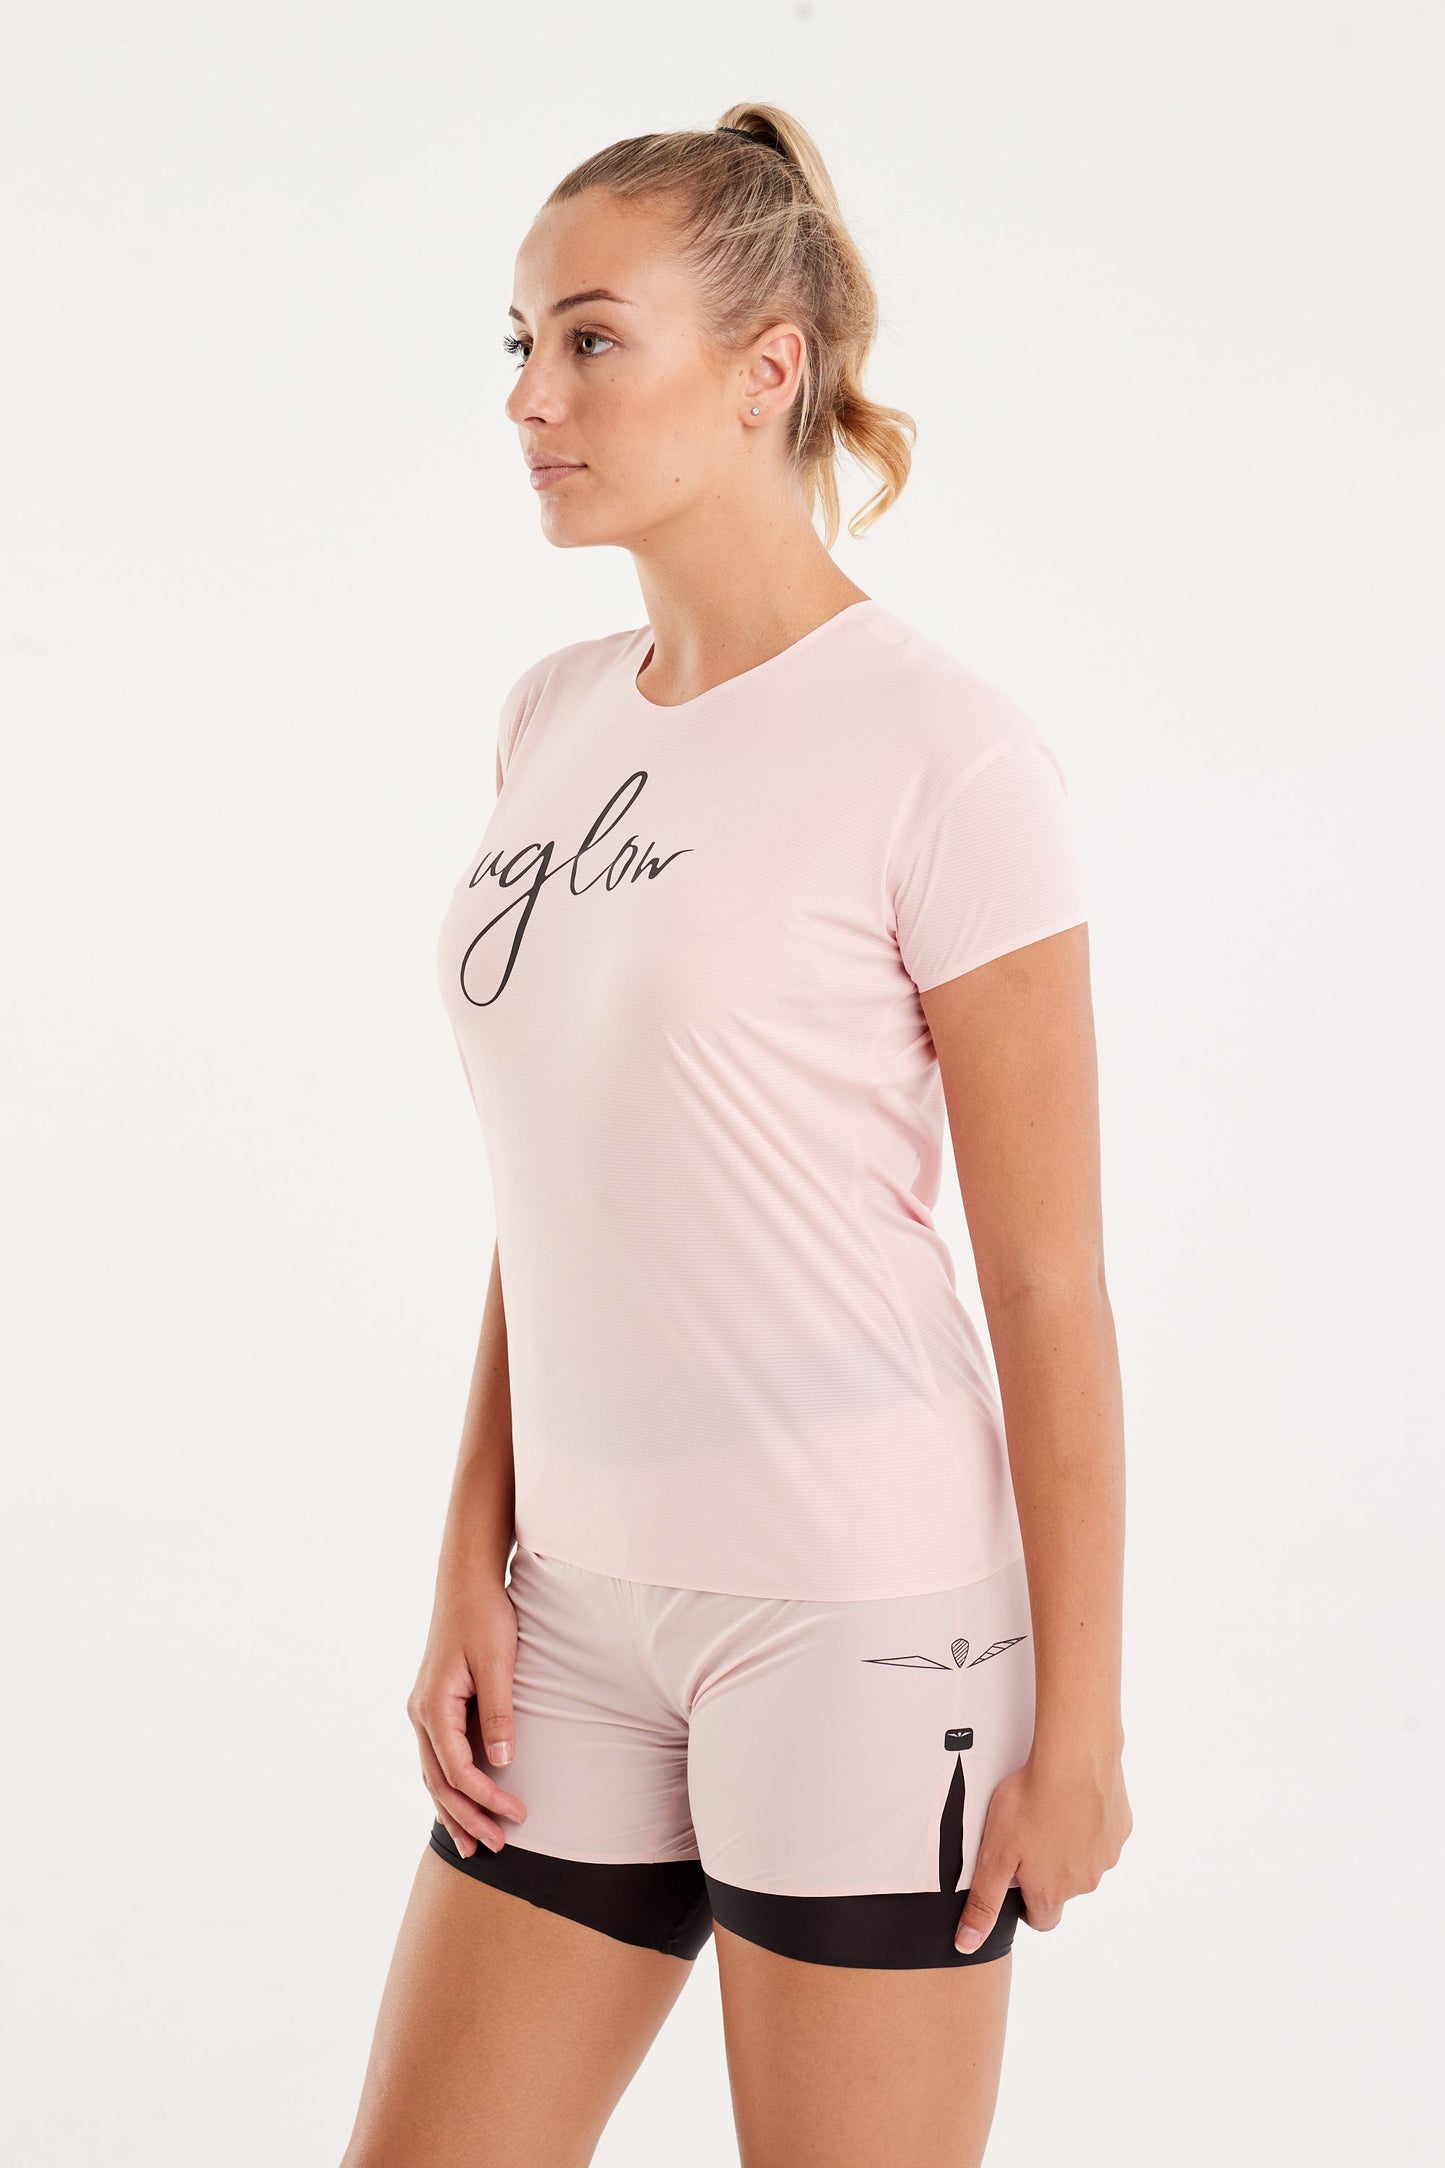 Uglow Women's Tee Super Light Recycled poly dyed - Rose Quartz